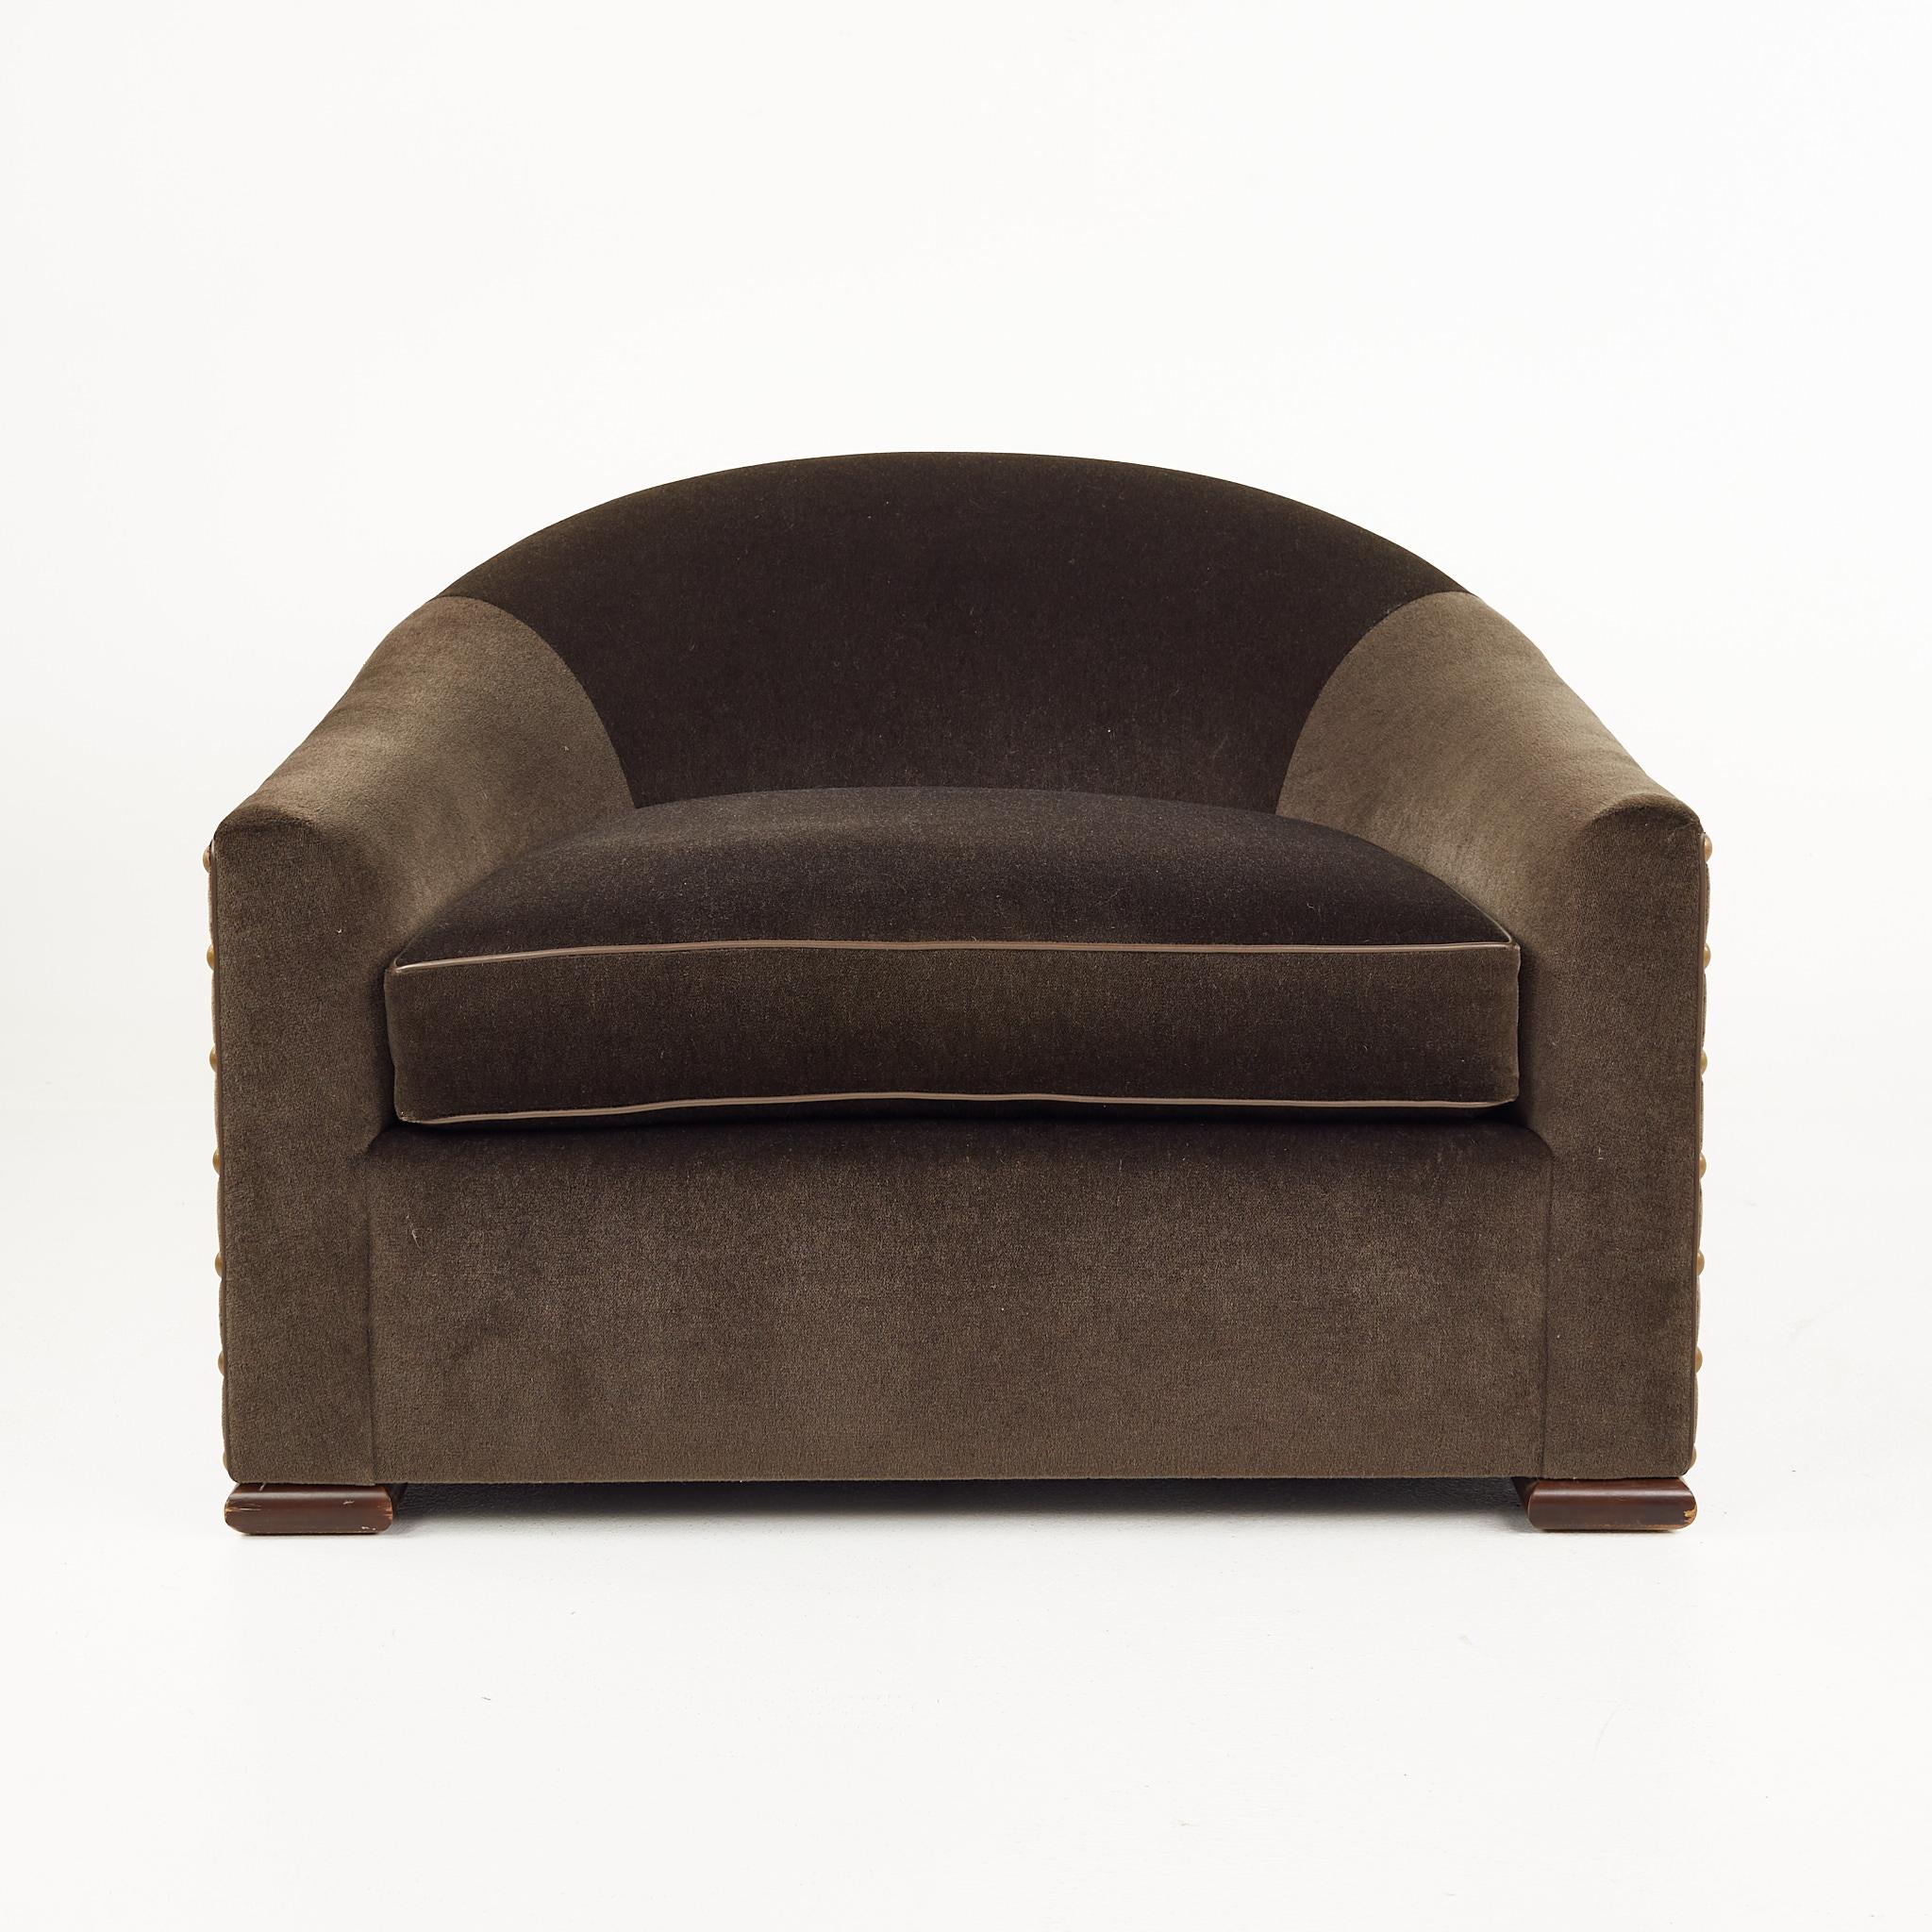 Mattaliano Contemporary Modern Mohair lounge chair

This chair measures: 40 wide x 40 deep x 28.5 inches high, with an arm height of 21 inches

All pieces of furniture can be had in what we call restored vintage condition. That means the piece